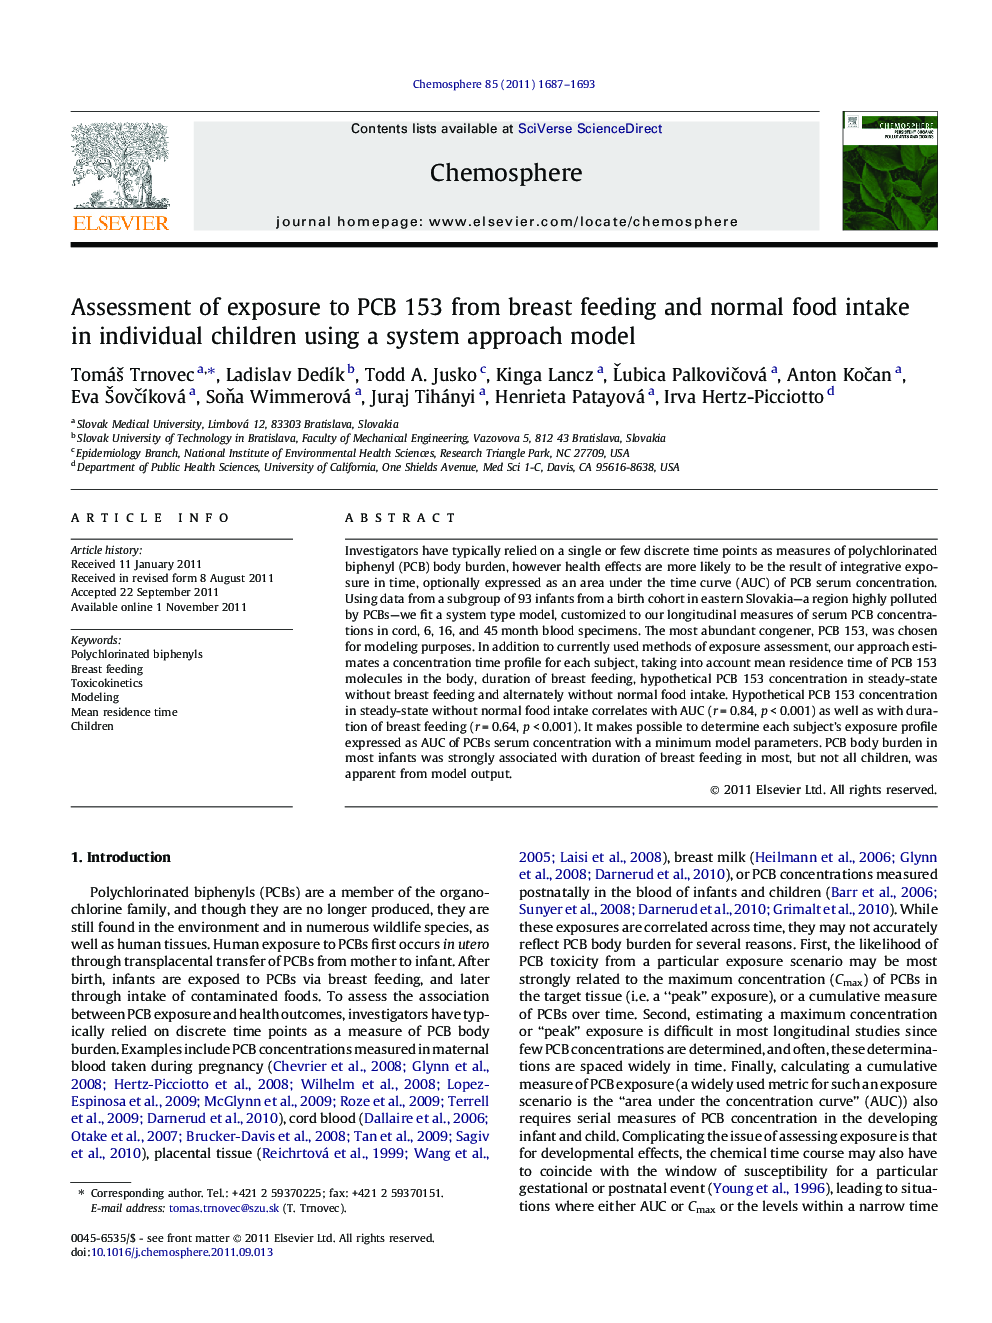 Assessment of exposure to PCB 153 from breast feeding and normal food intake in individual children using a system approach model